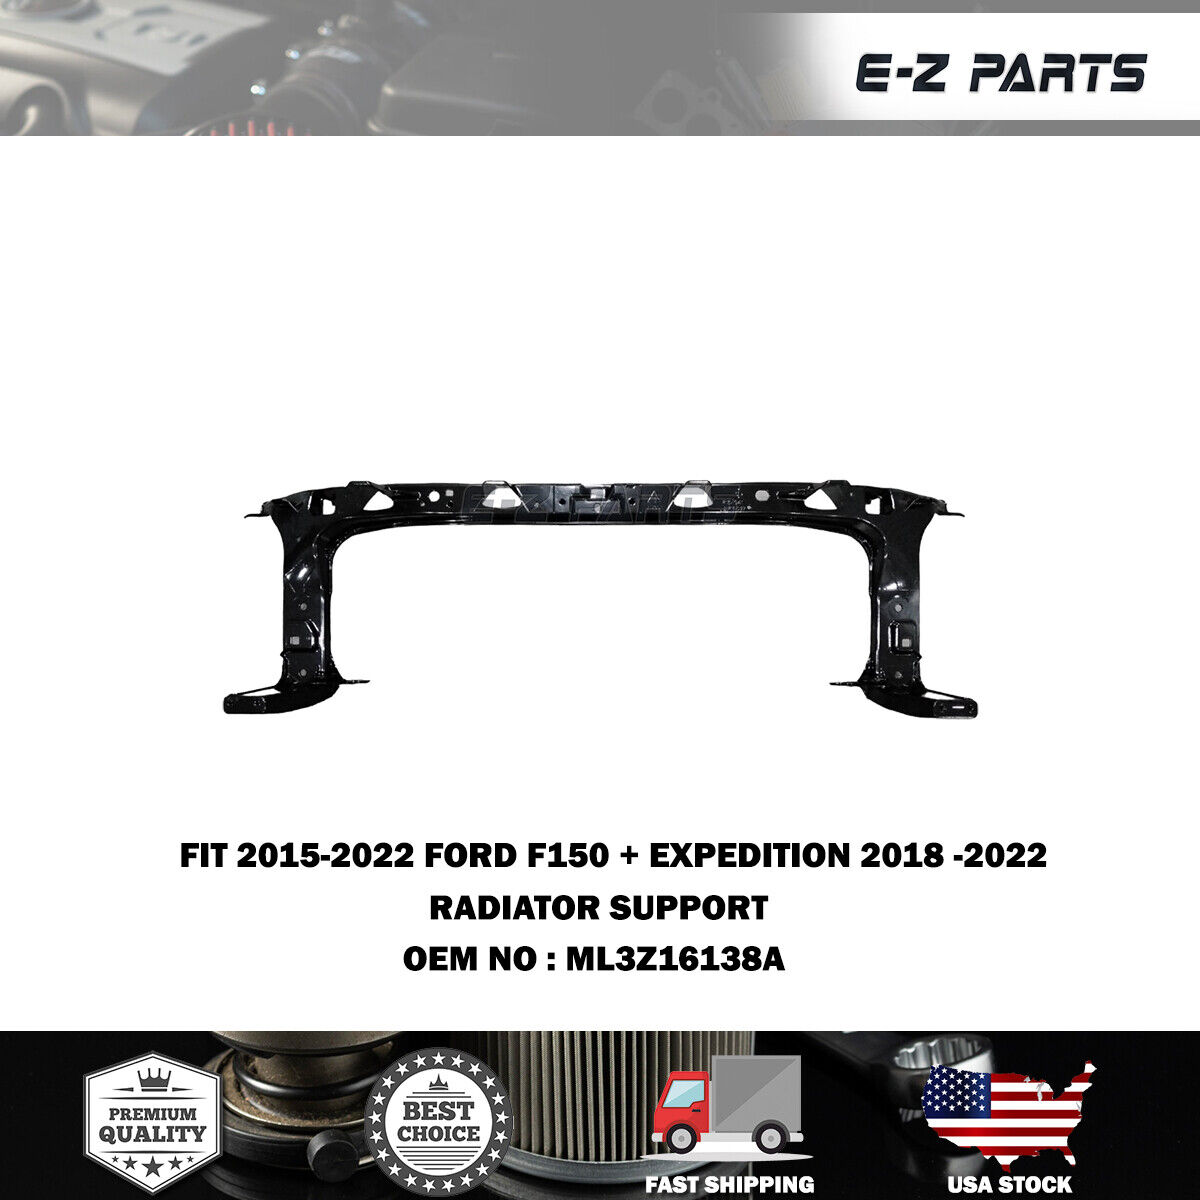 For 2015-2022 Ford F150 Radiator Support ML3Z16138A